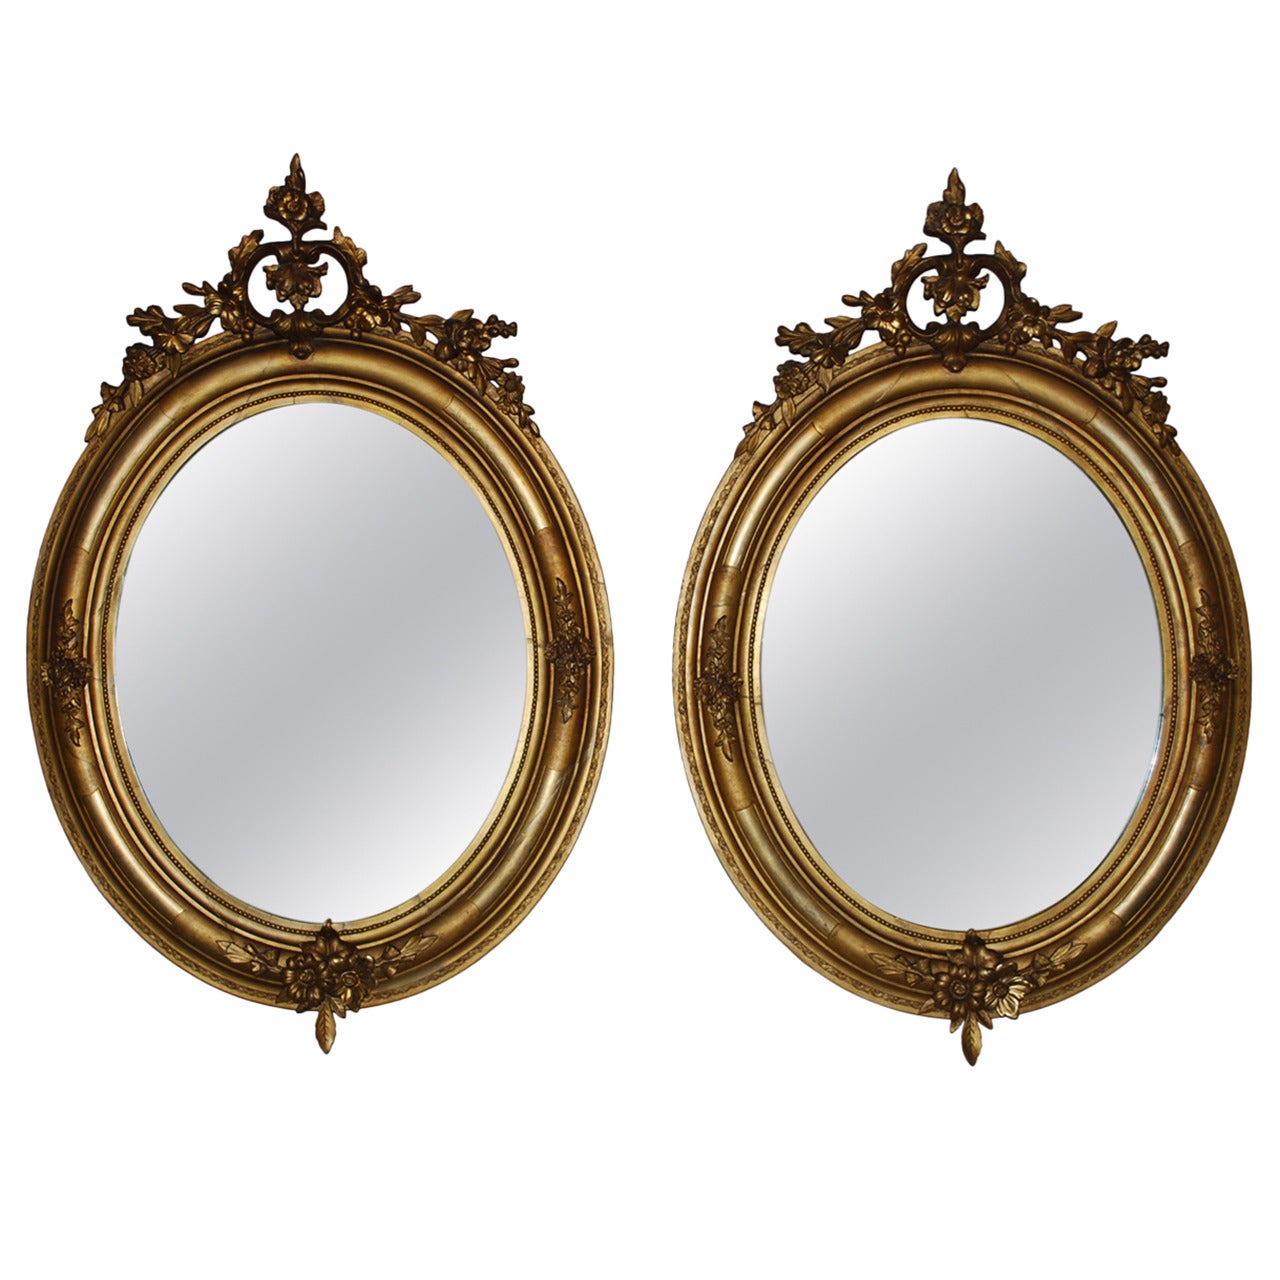 19th Century Pair of Gold Gilded Oval Mirrors